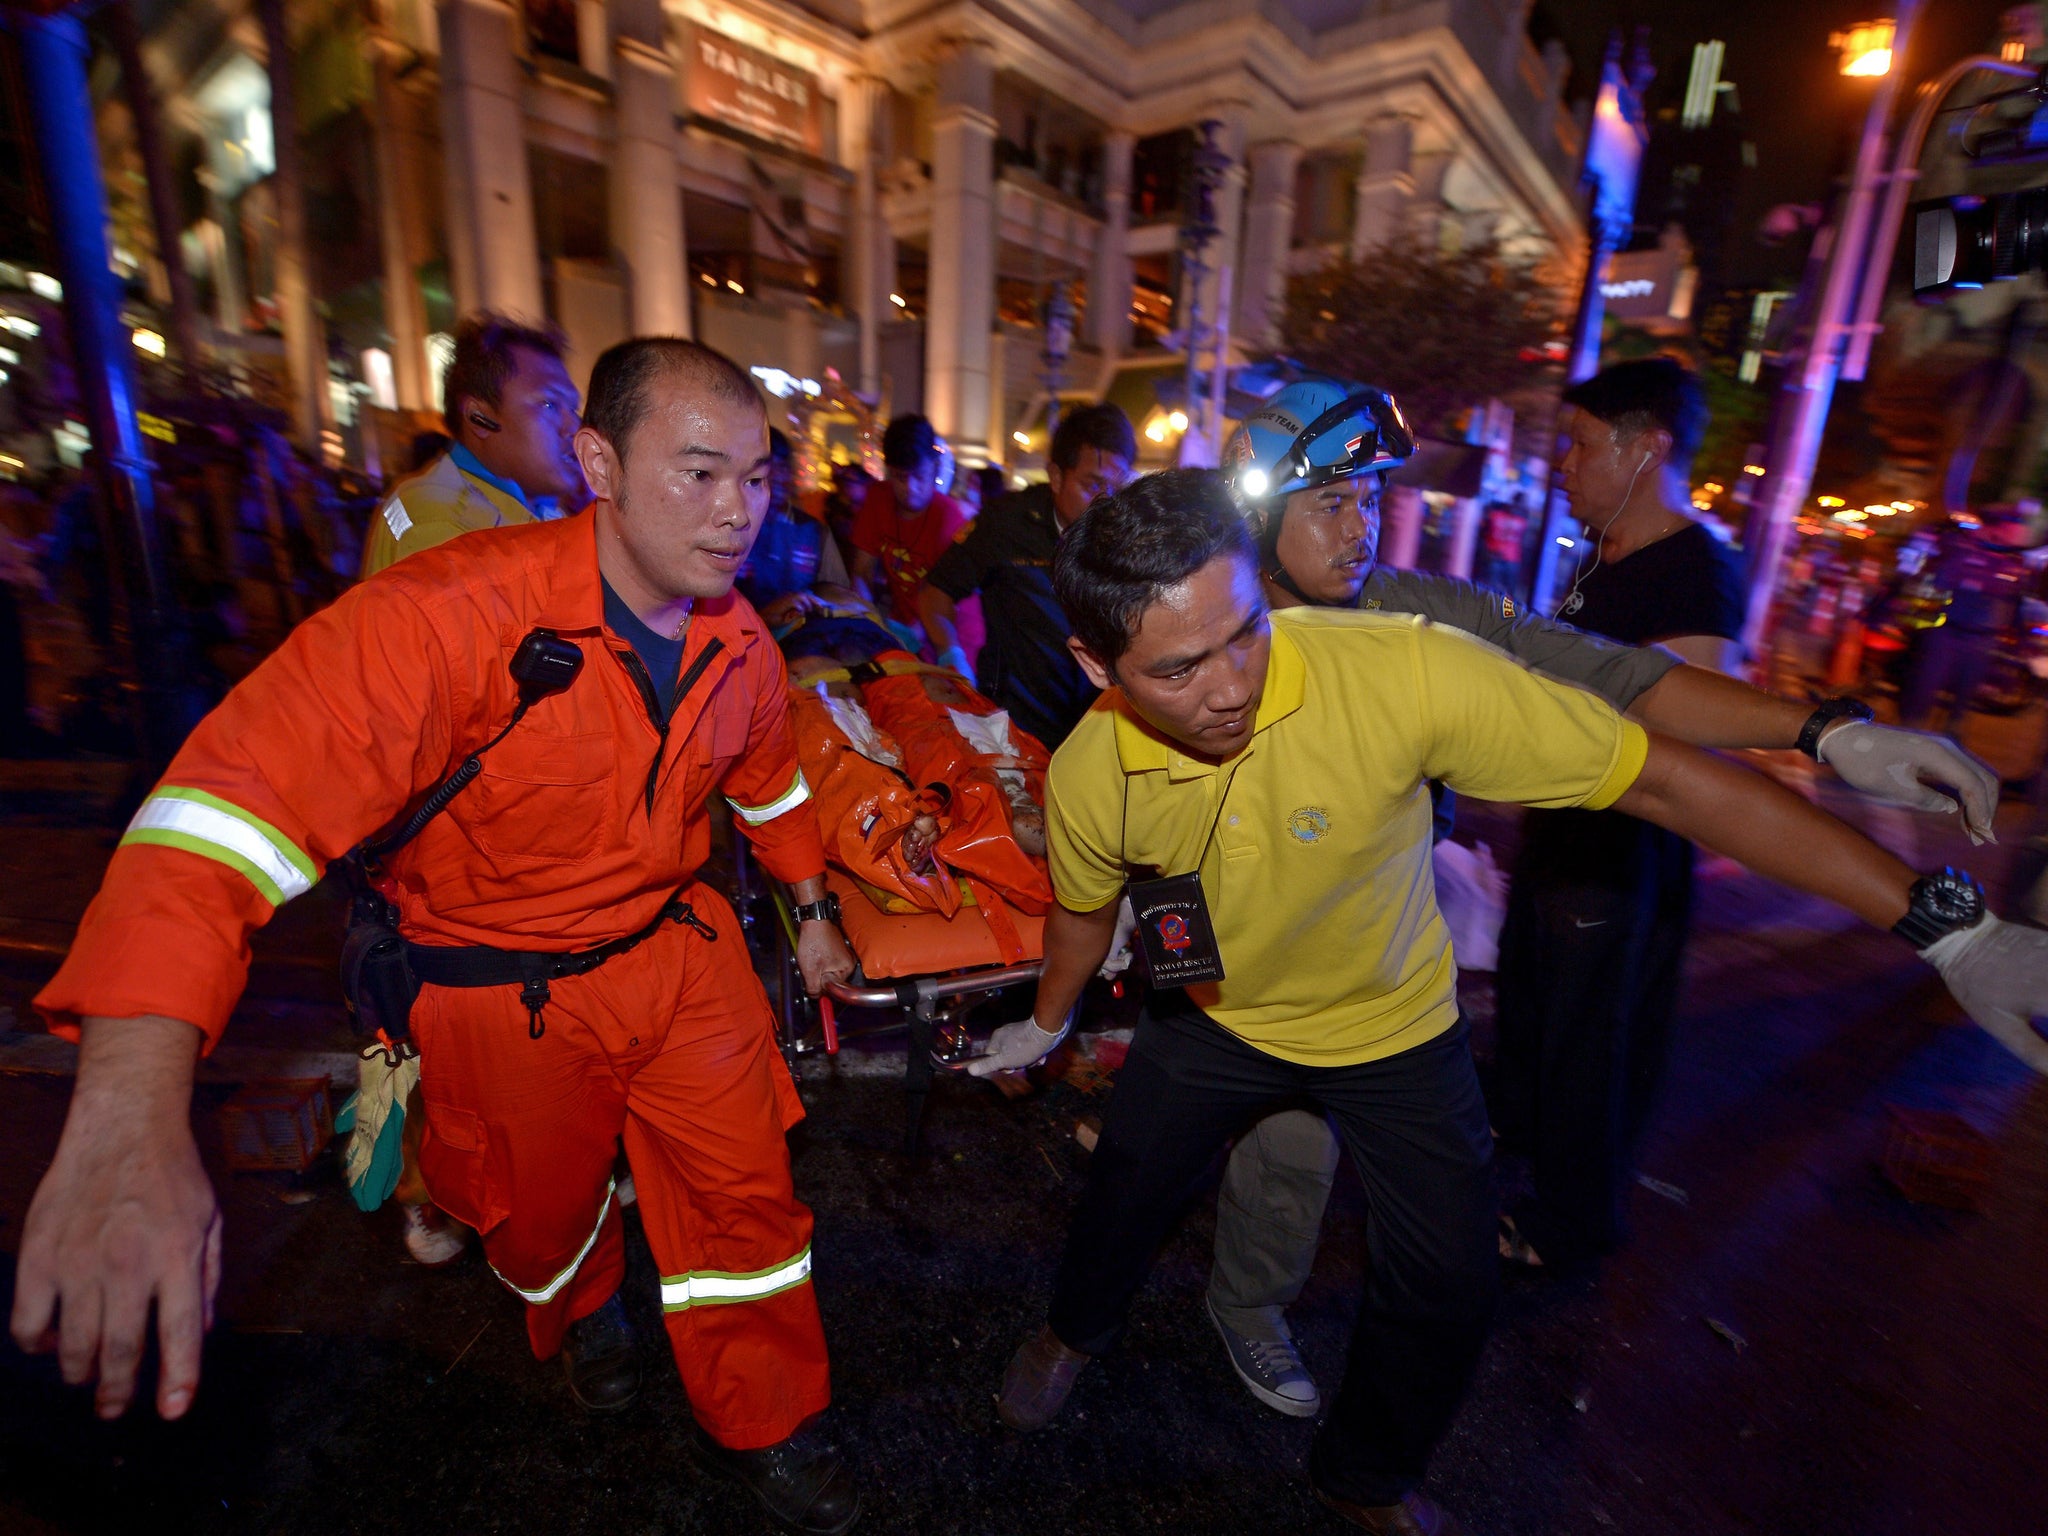 Thai rescue workers carry an injured person away from the scene - (EPA)